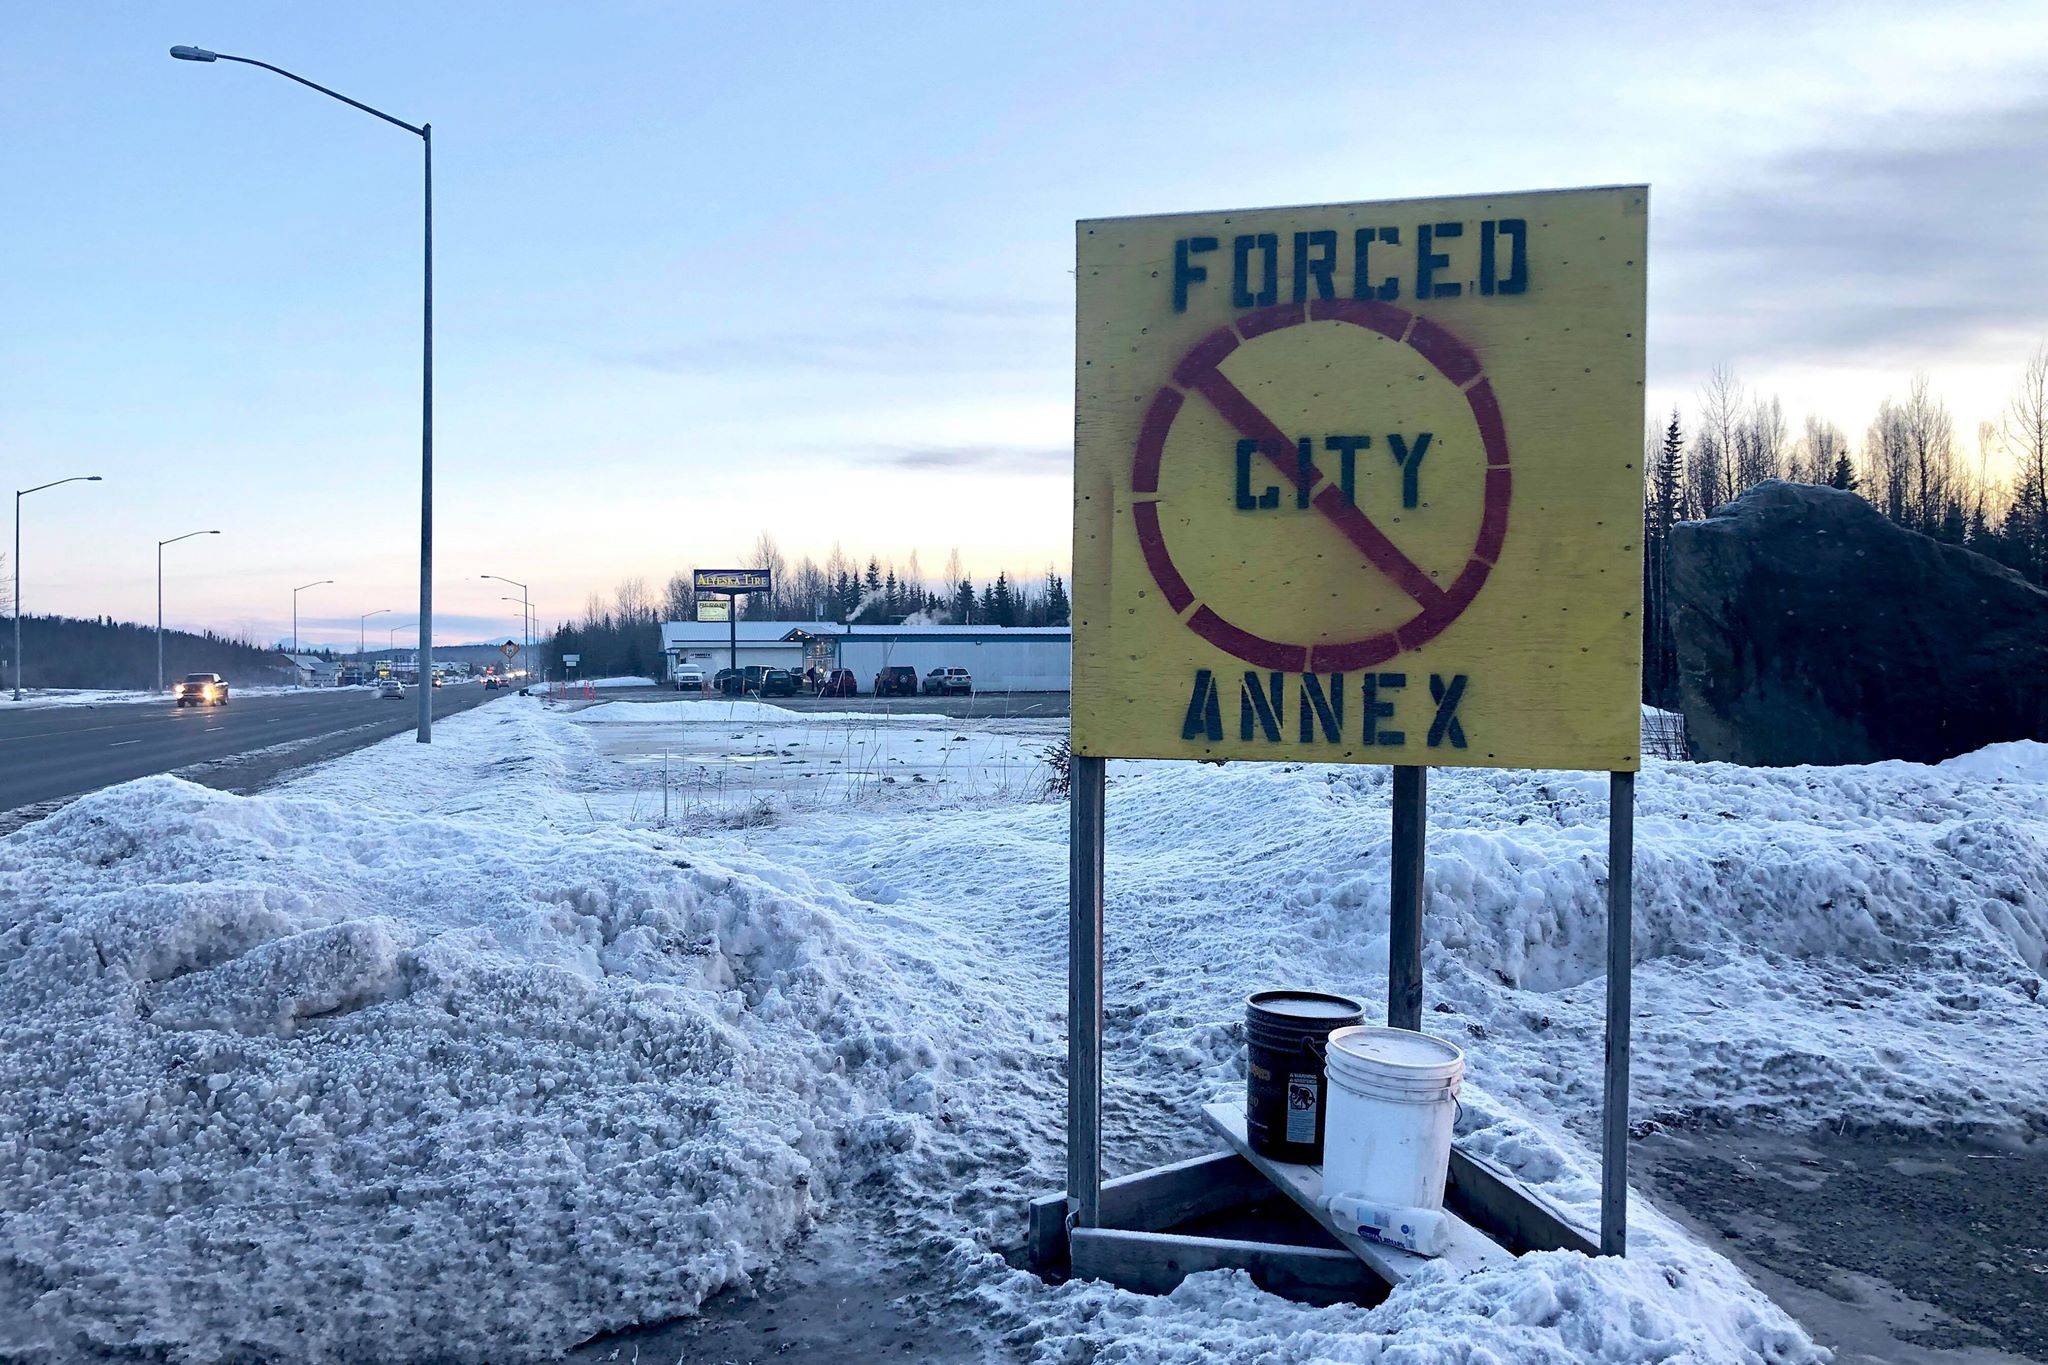 A sign opposing the city of Soldotna’s efforts to annex nearby areas sits along the Kenai Spur Highway in an area the city petitioned the state to annex through the legislative process on Dec. 20, 2019, in Soldotna, Alaska. (Photo by Victoria Petersen/Peninsula Clarion)